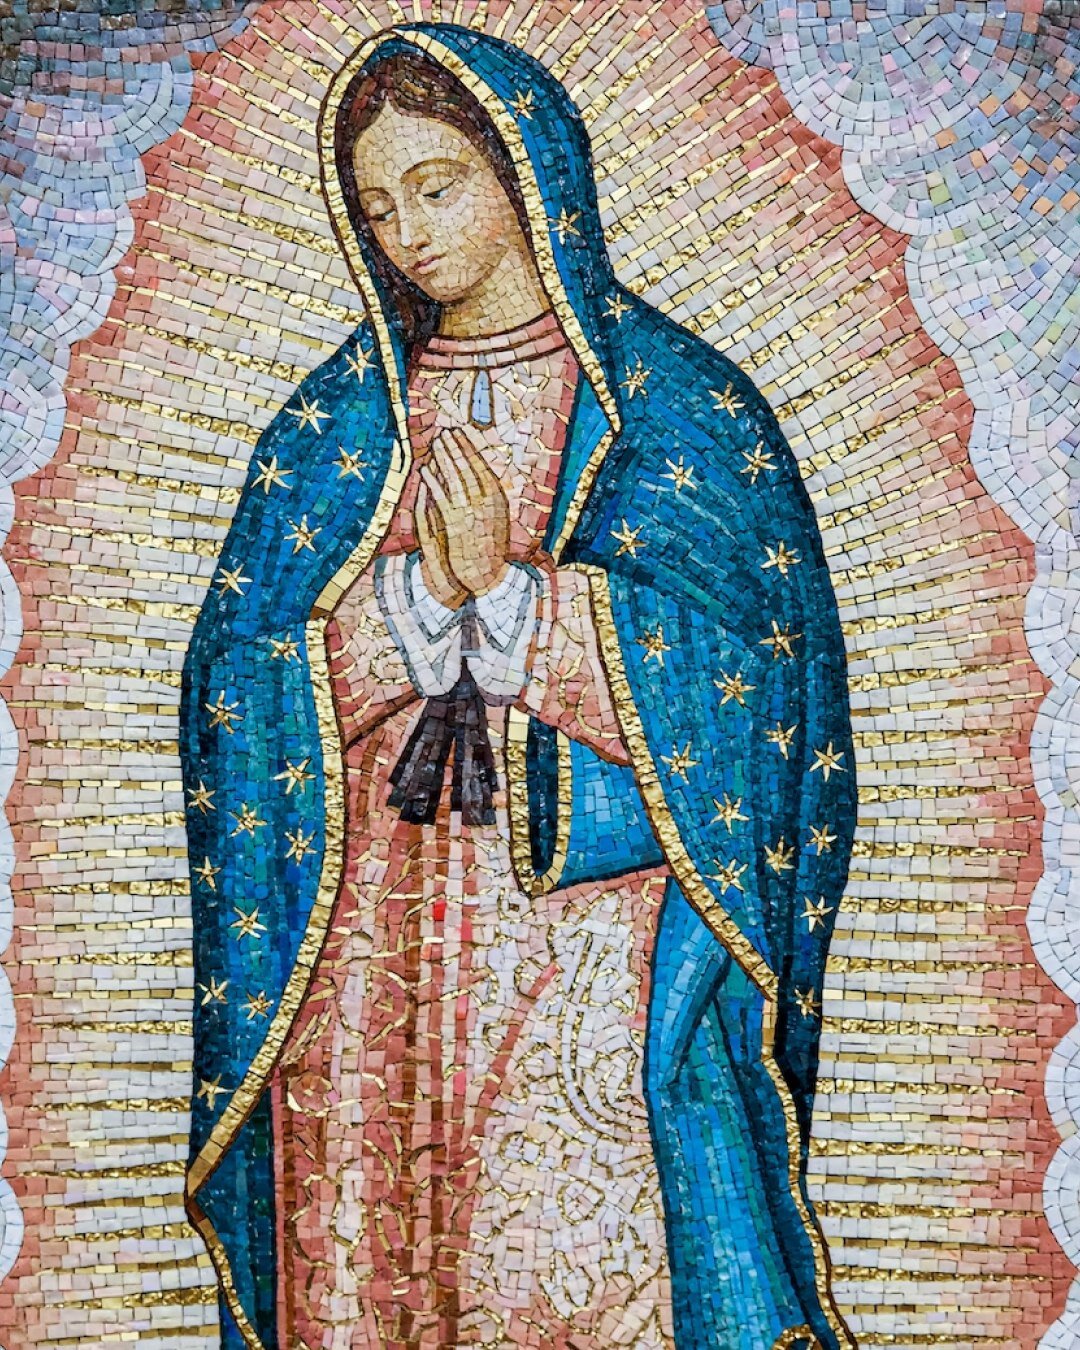 Our Lady of Guadalupe Celebration
Sunday, December 11th

11:30am - Rosary in Clarendon Square
11:45am - Mariachi Procession
12:00pm - Bilingual Mass
1:00pm - &iexcl;Fiesta! in the Parish Center Gym

*Tickets available after Mass 12/4 (only 250 availa